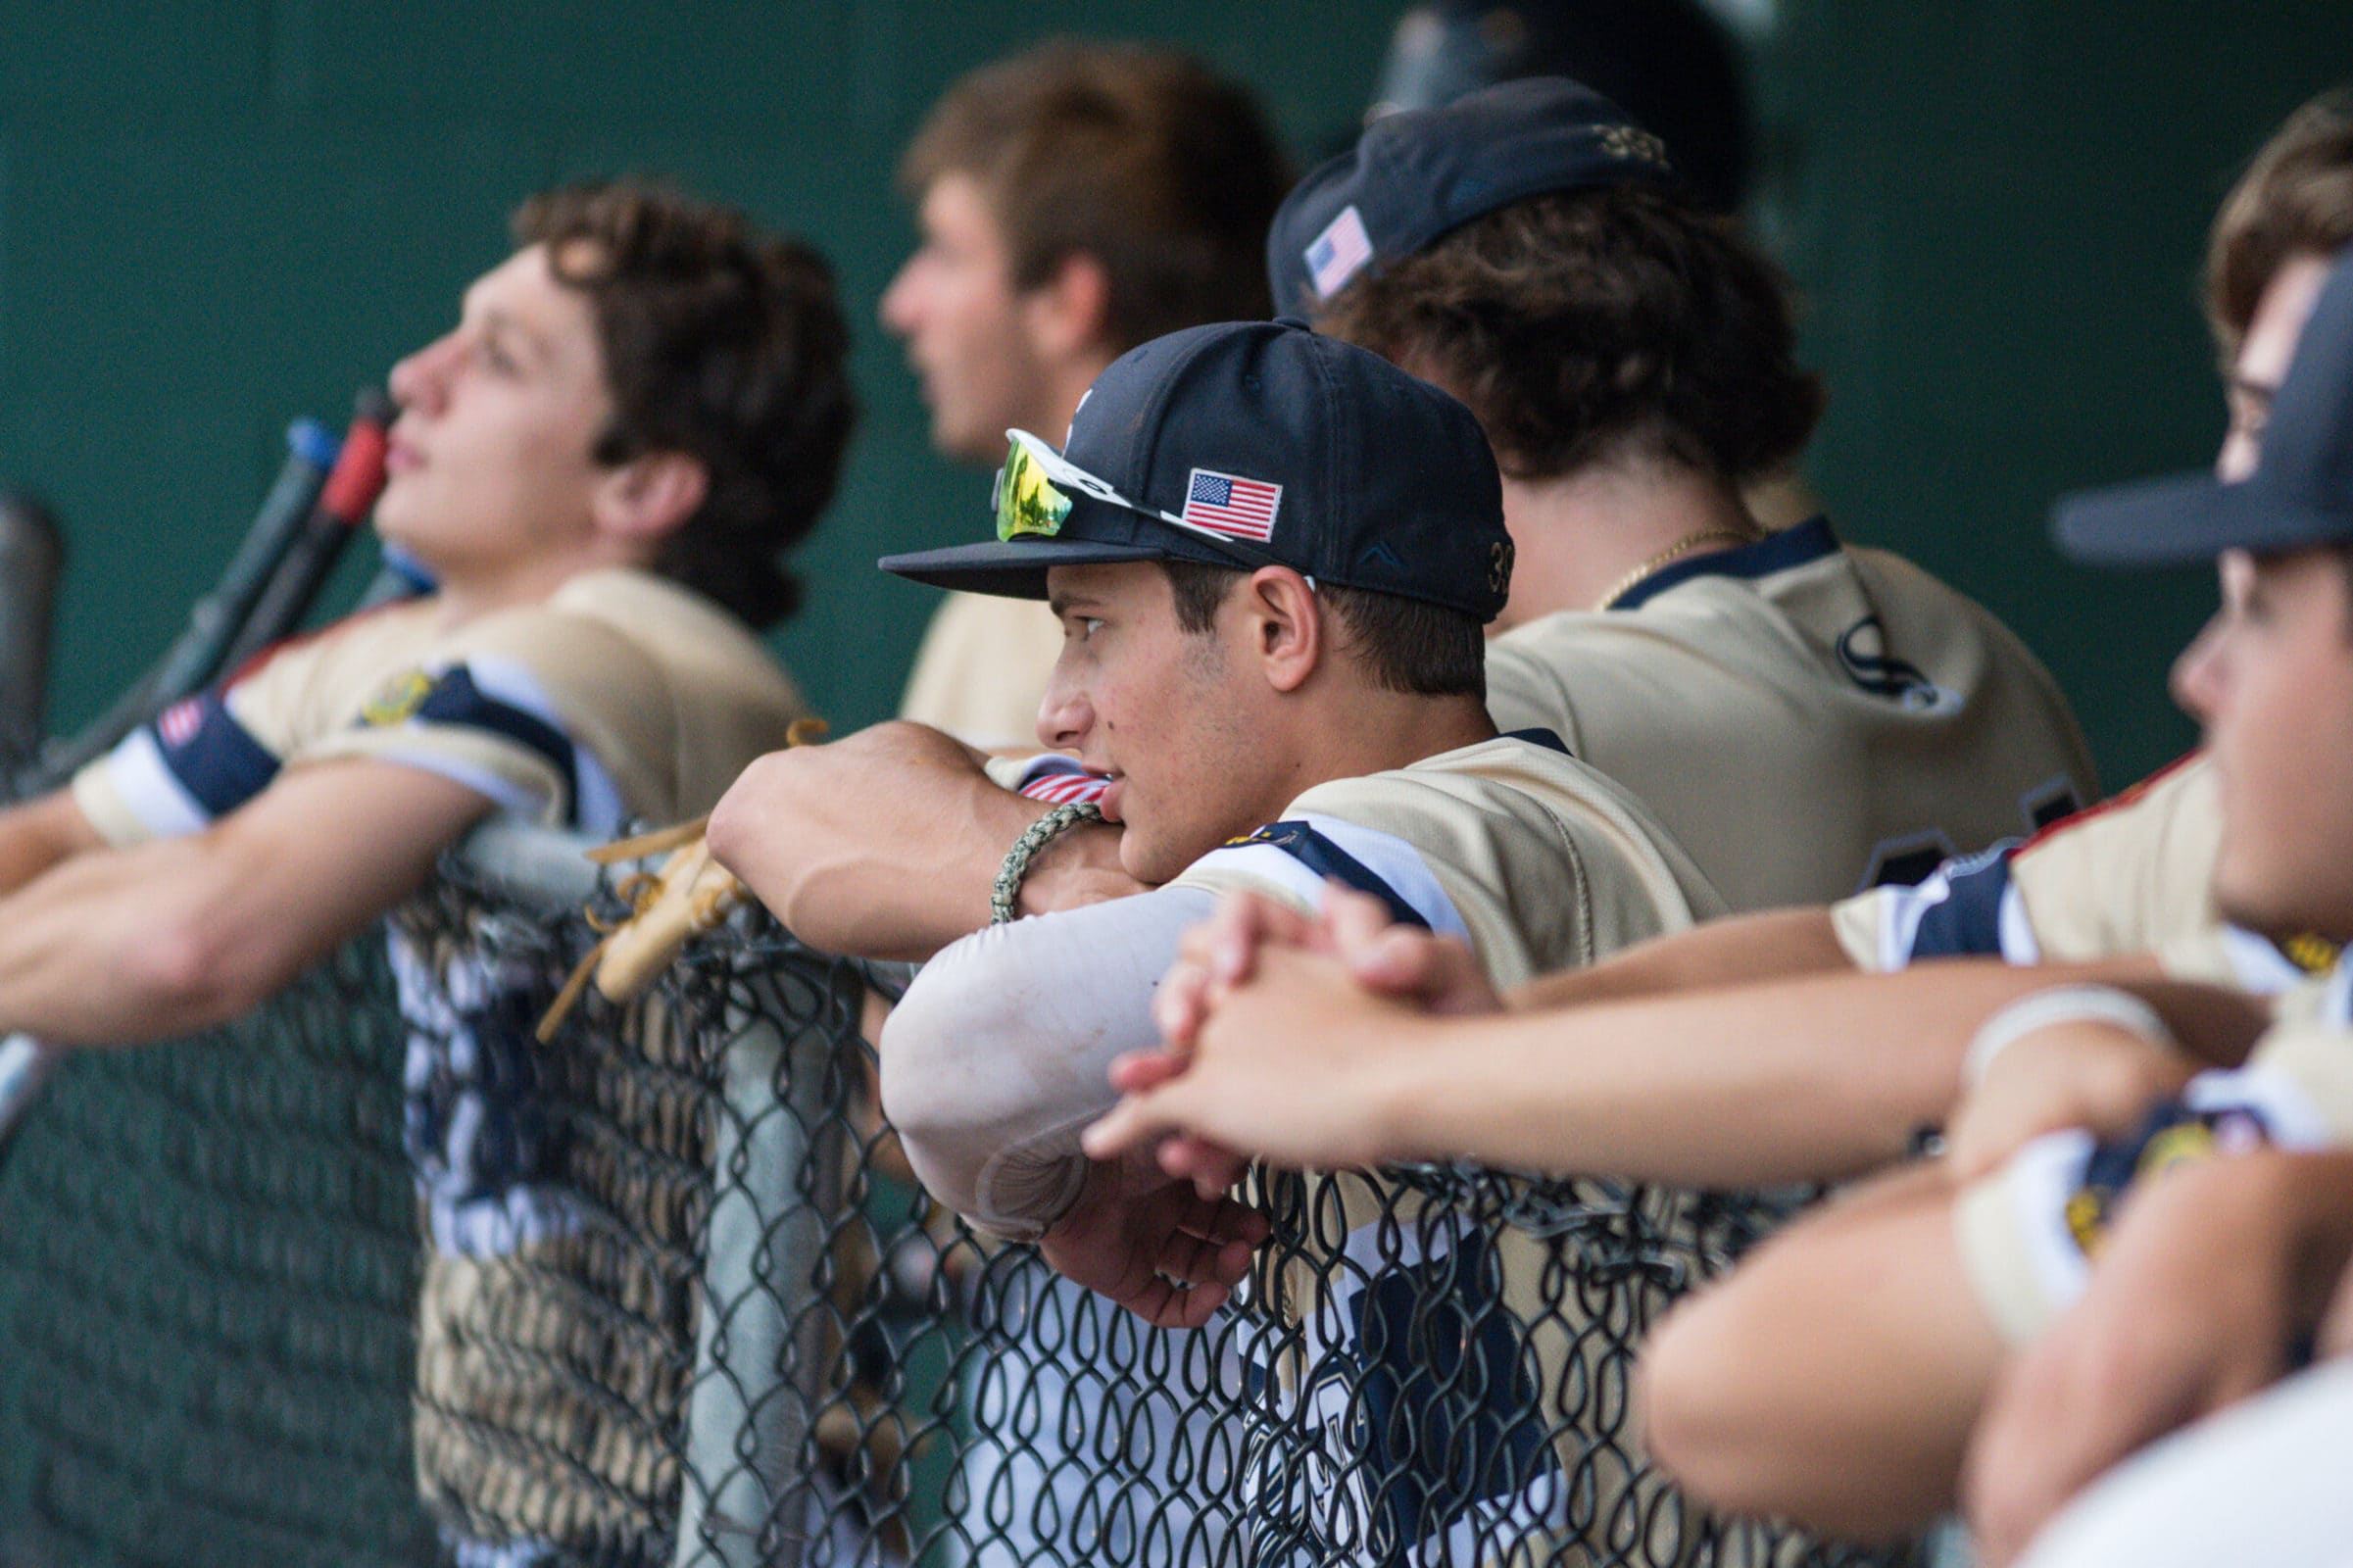 Shrewsbury players look on during their team’s game against Milford. (Photo/Jesse Kucewicz)